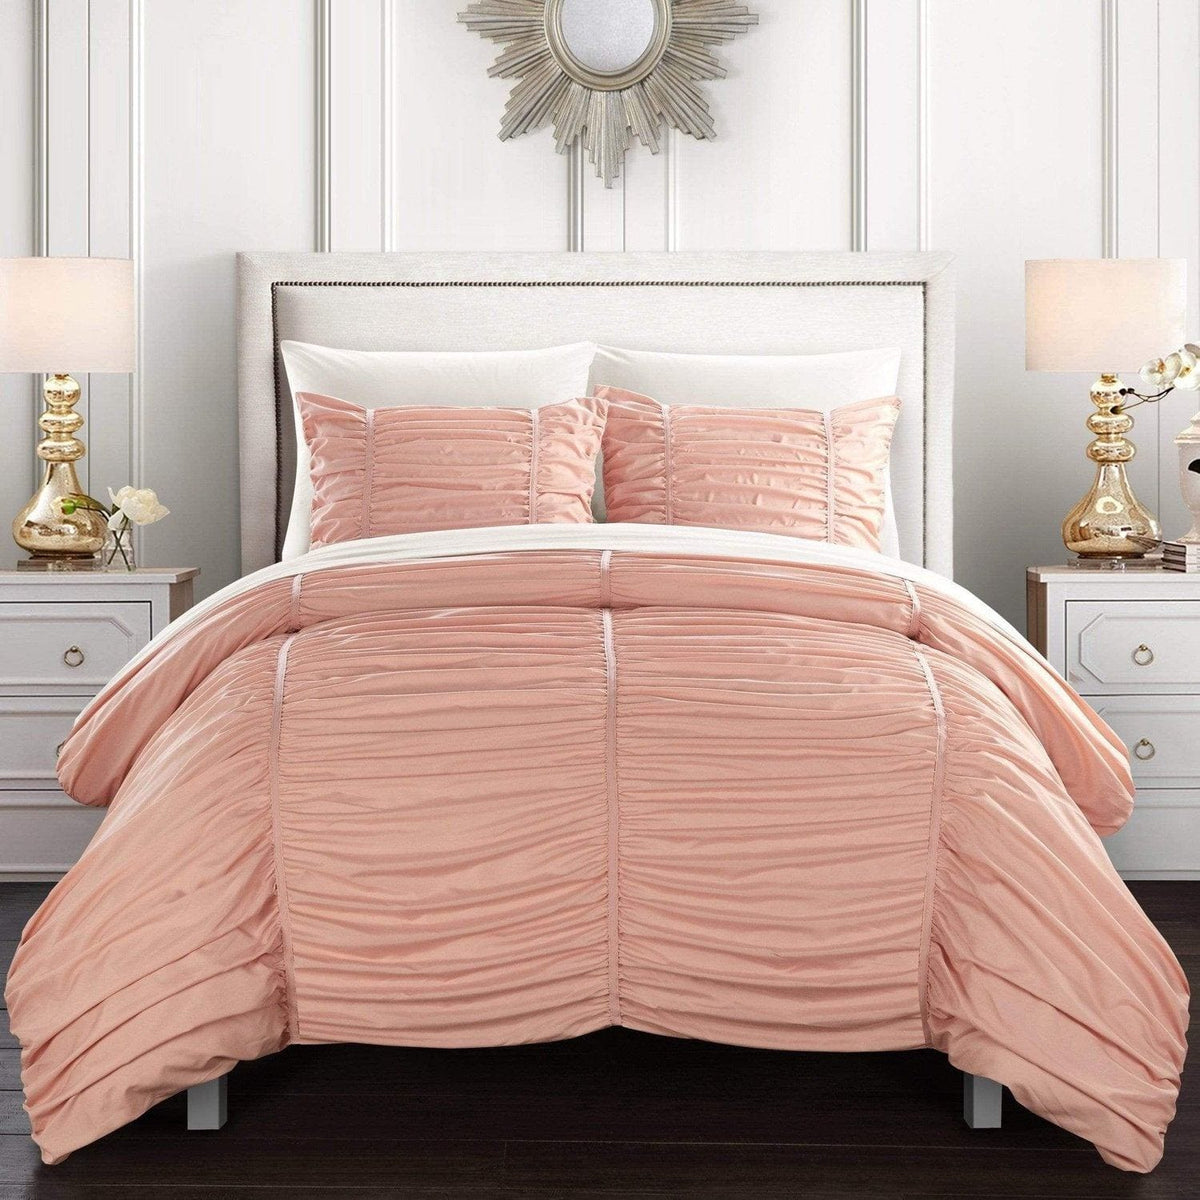 Chic Home Kaiah 3 Piece Striped Comforter Set Coral